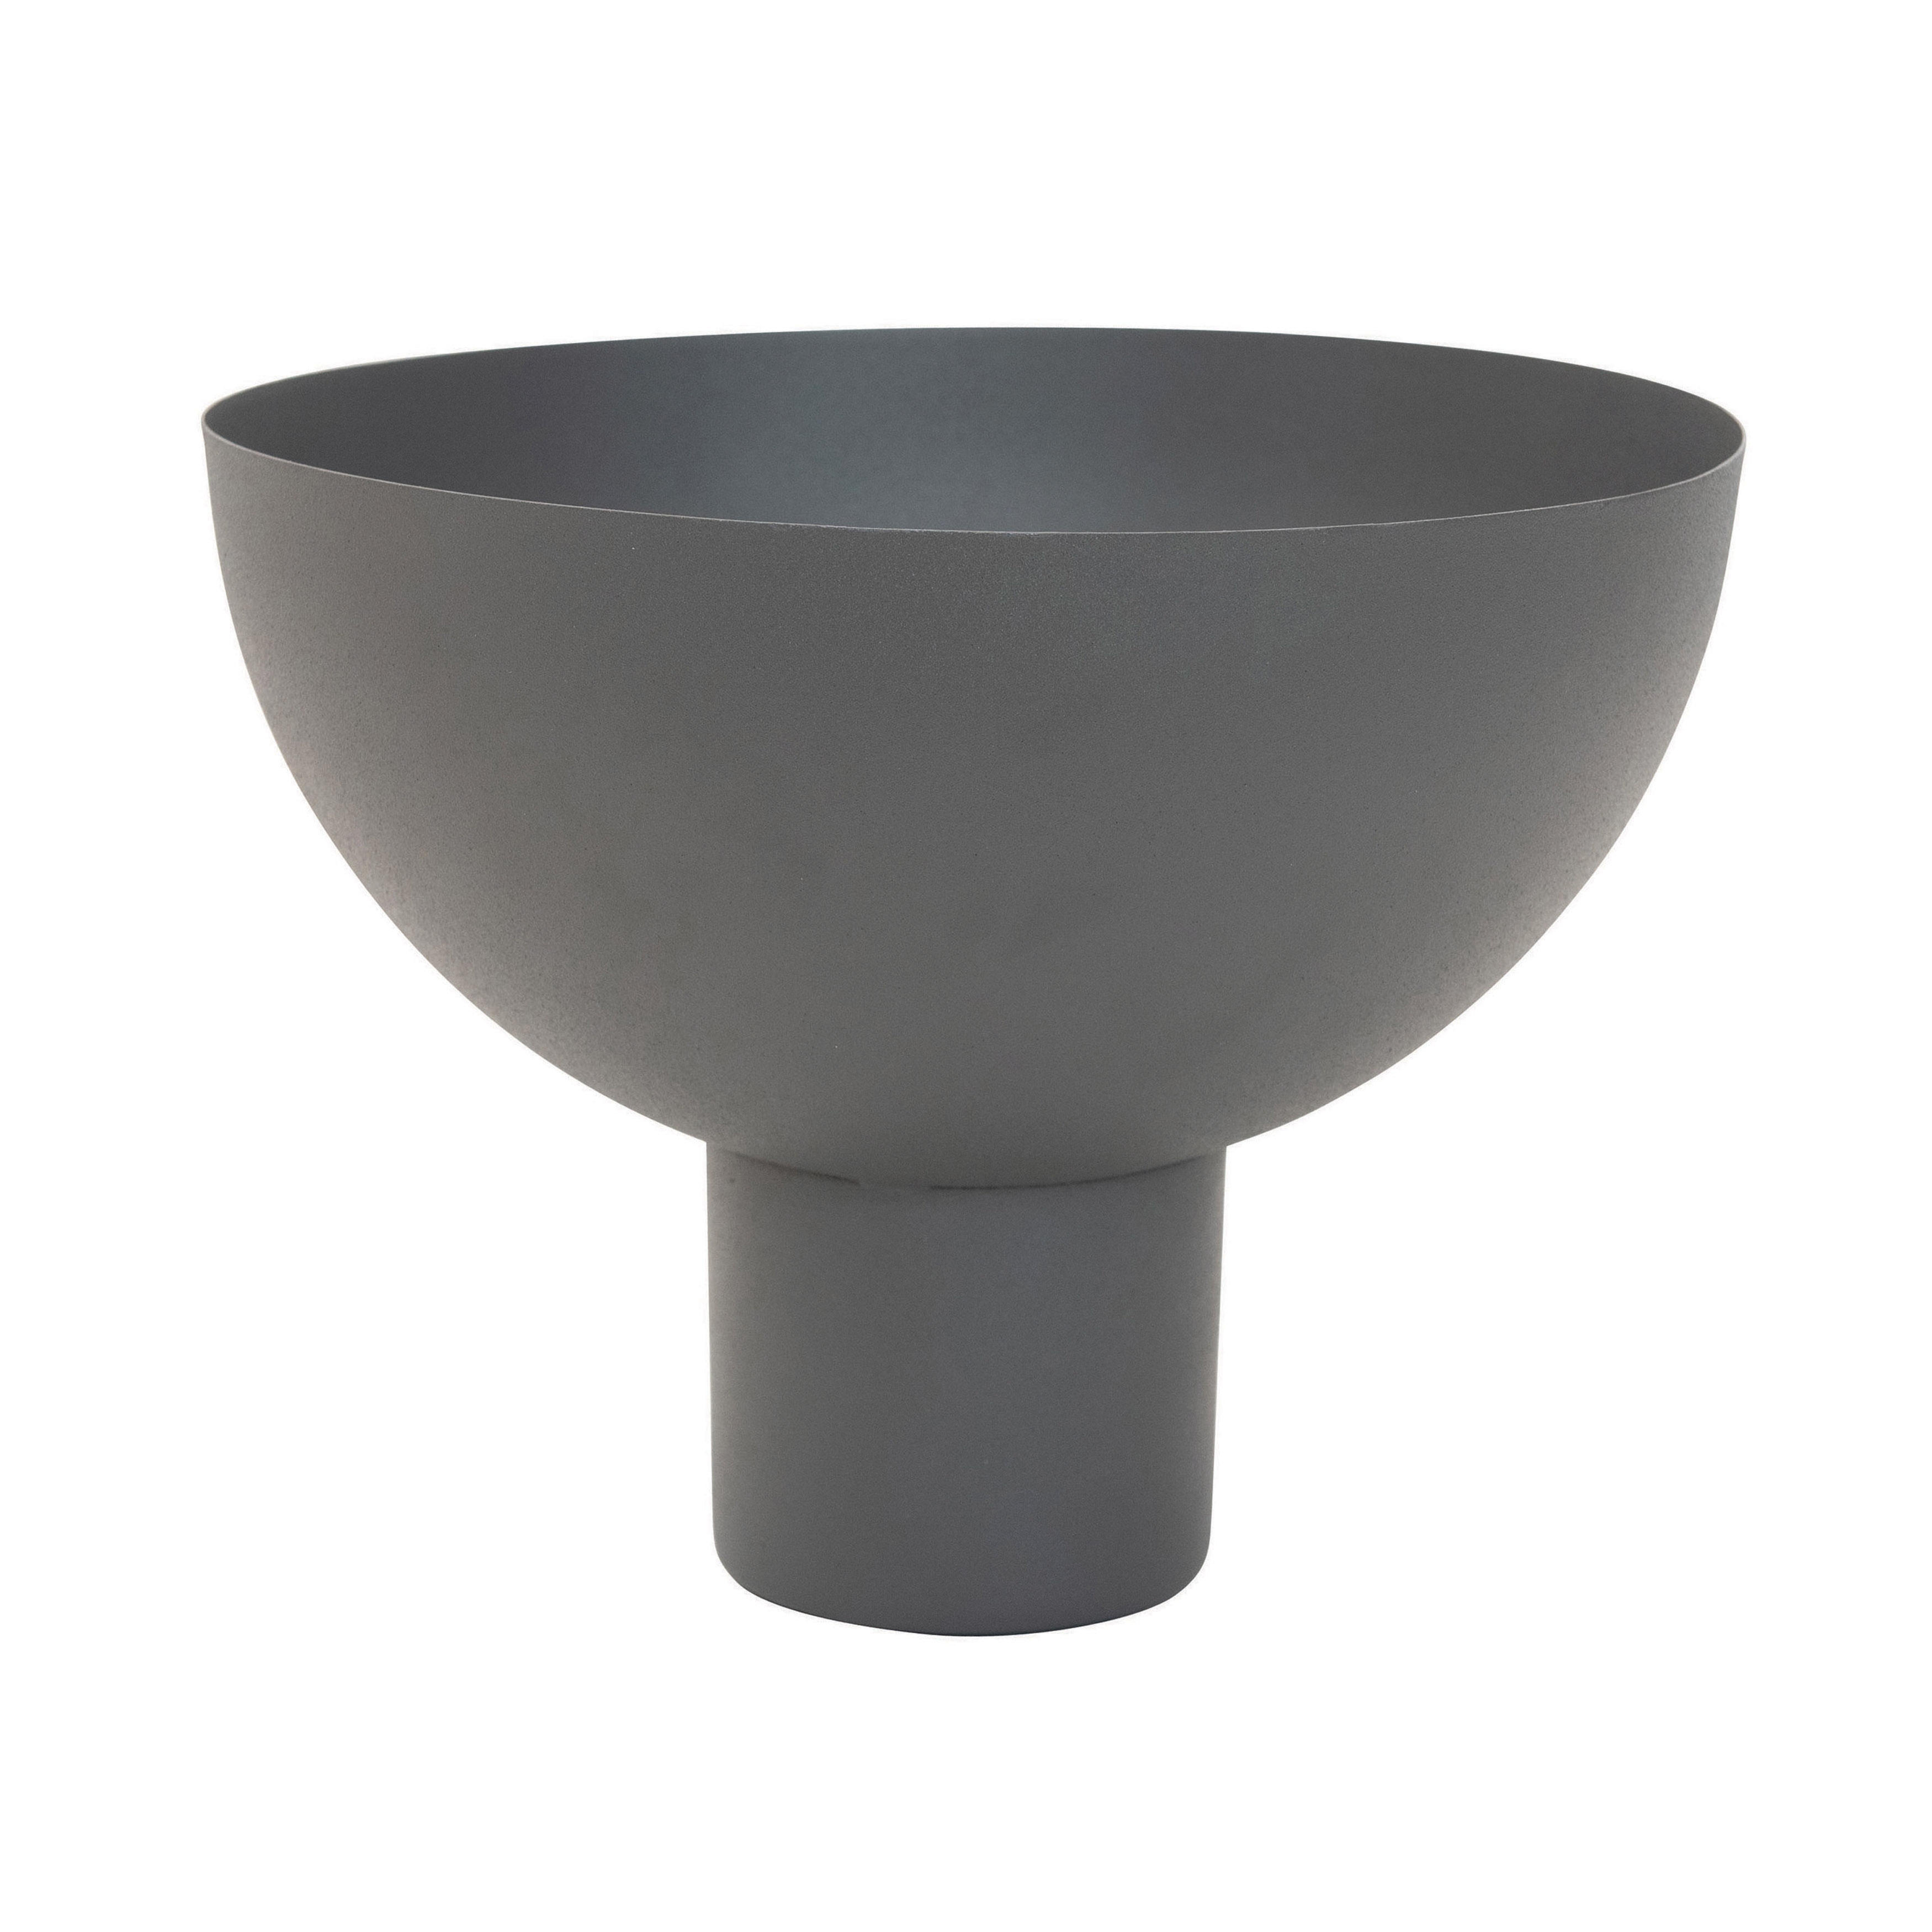 Decorative Metal Footed Bowl, Bed 33786628 & - - - Bath Sale Beyond Grey On